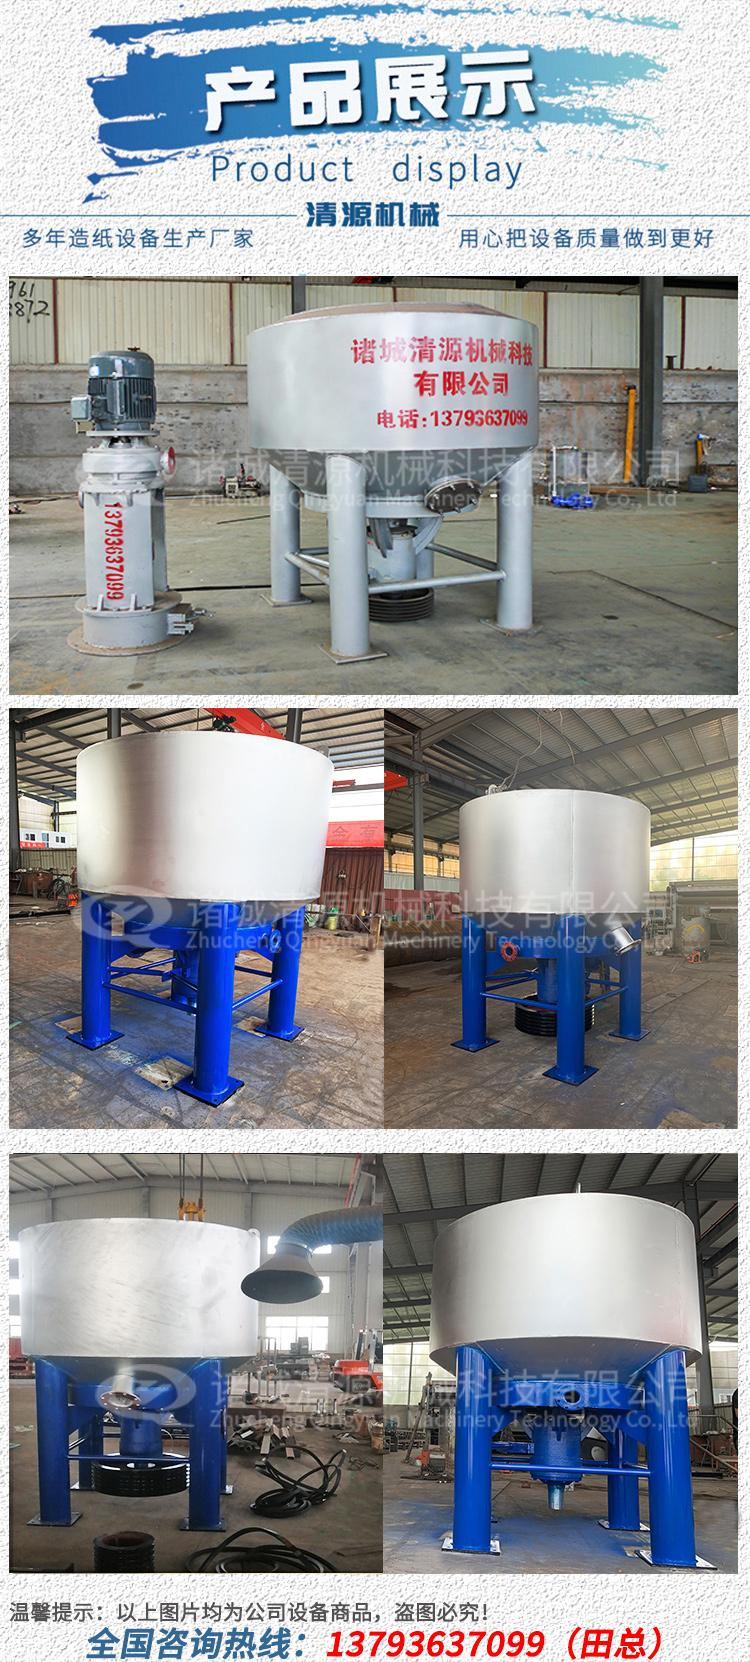 Qingyuan Paper Plastic Separation Complete Equipment Low Consistency Vertical D-type Hydraulic Pulp Crusher Chemical Pulp Mechanical Pulping Equipment